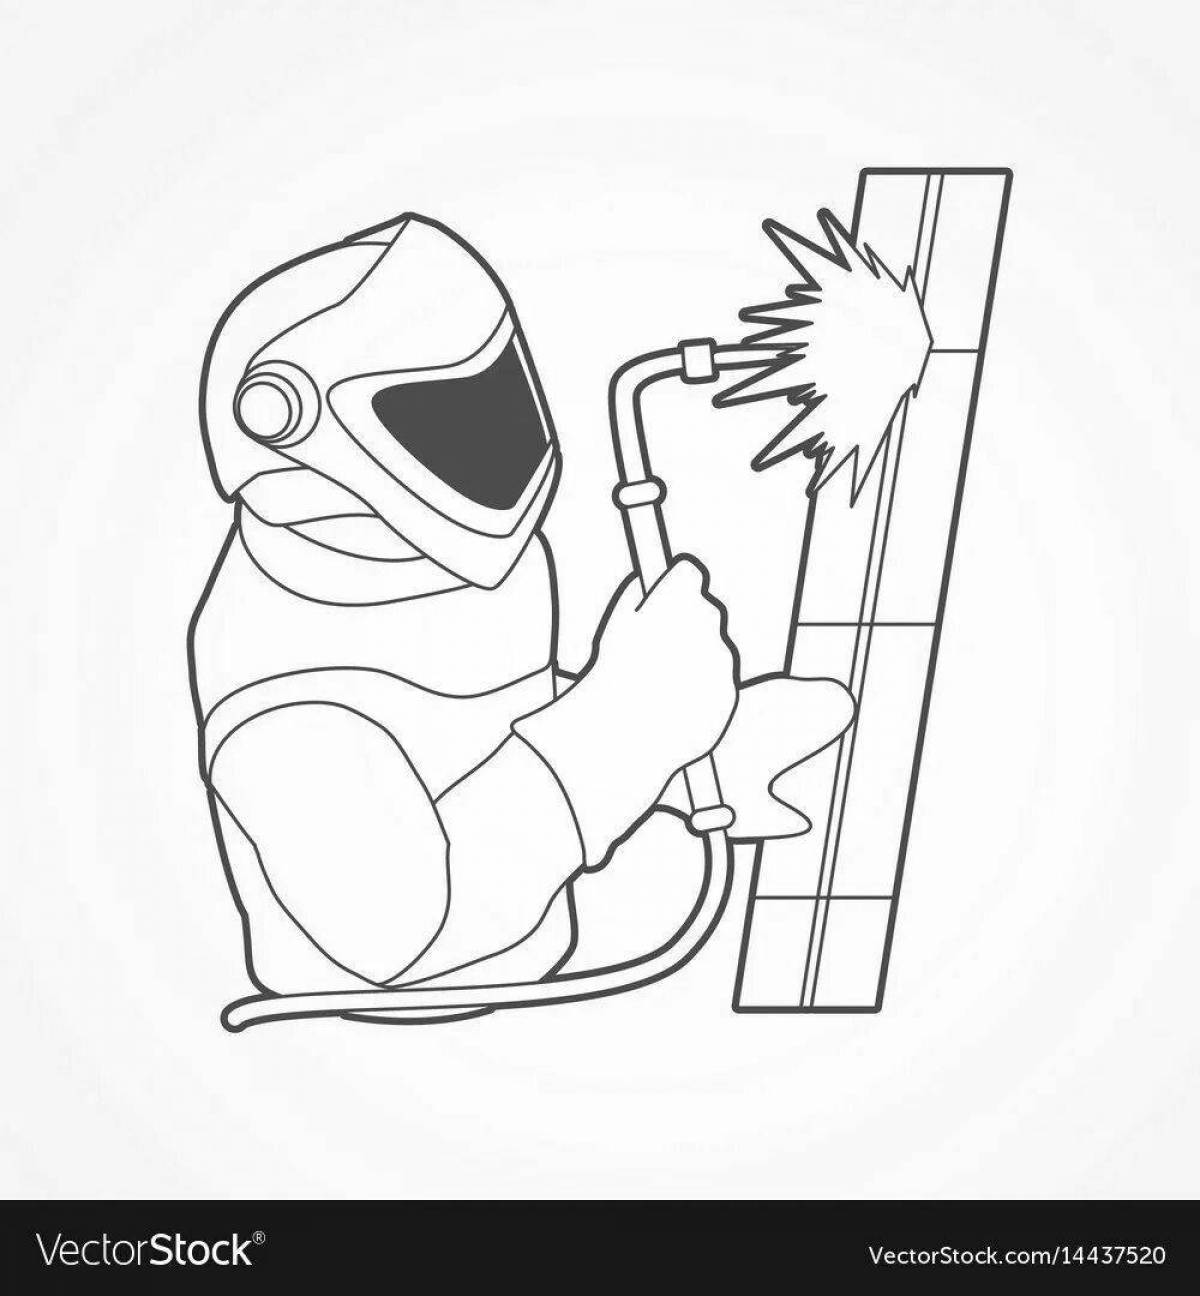 Coloring page graceful welder